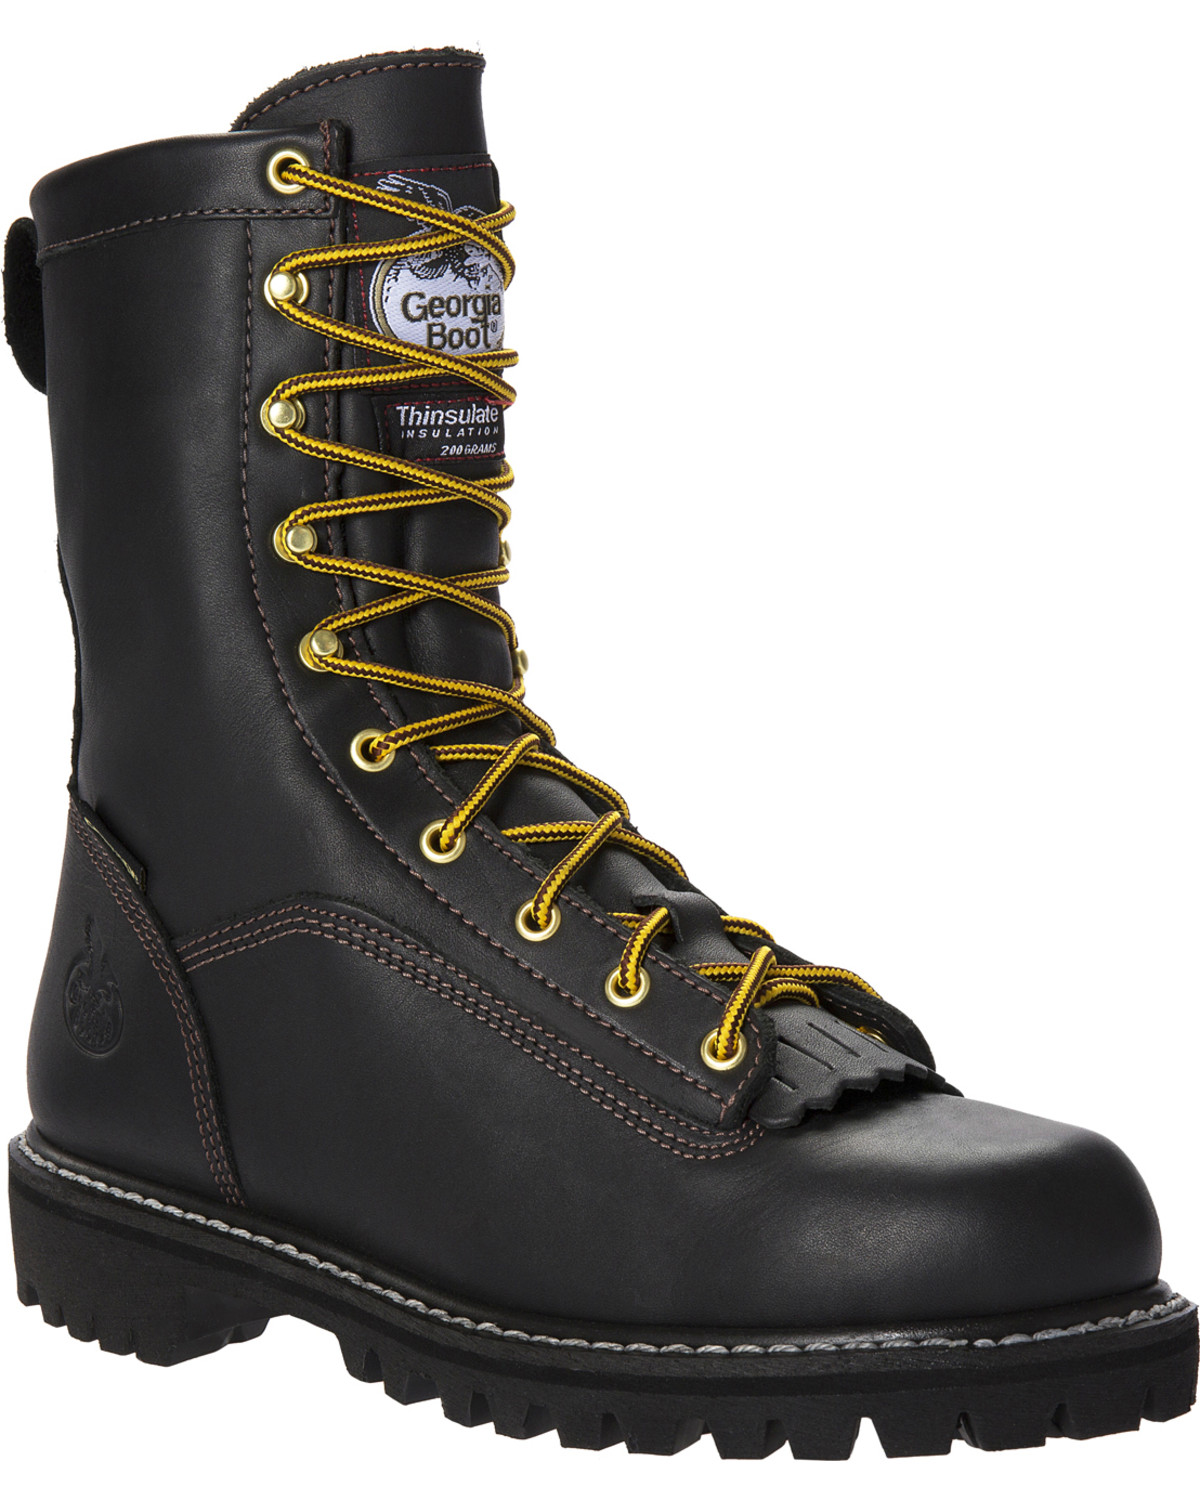 black insulated work boots